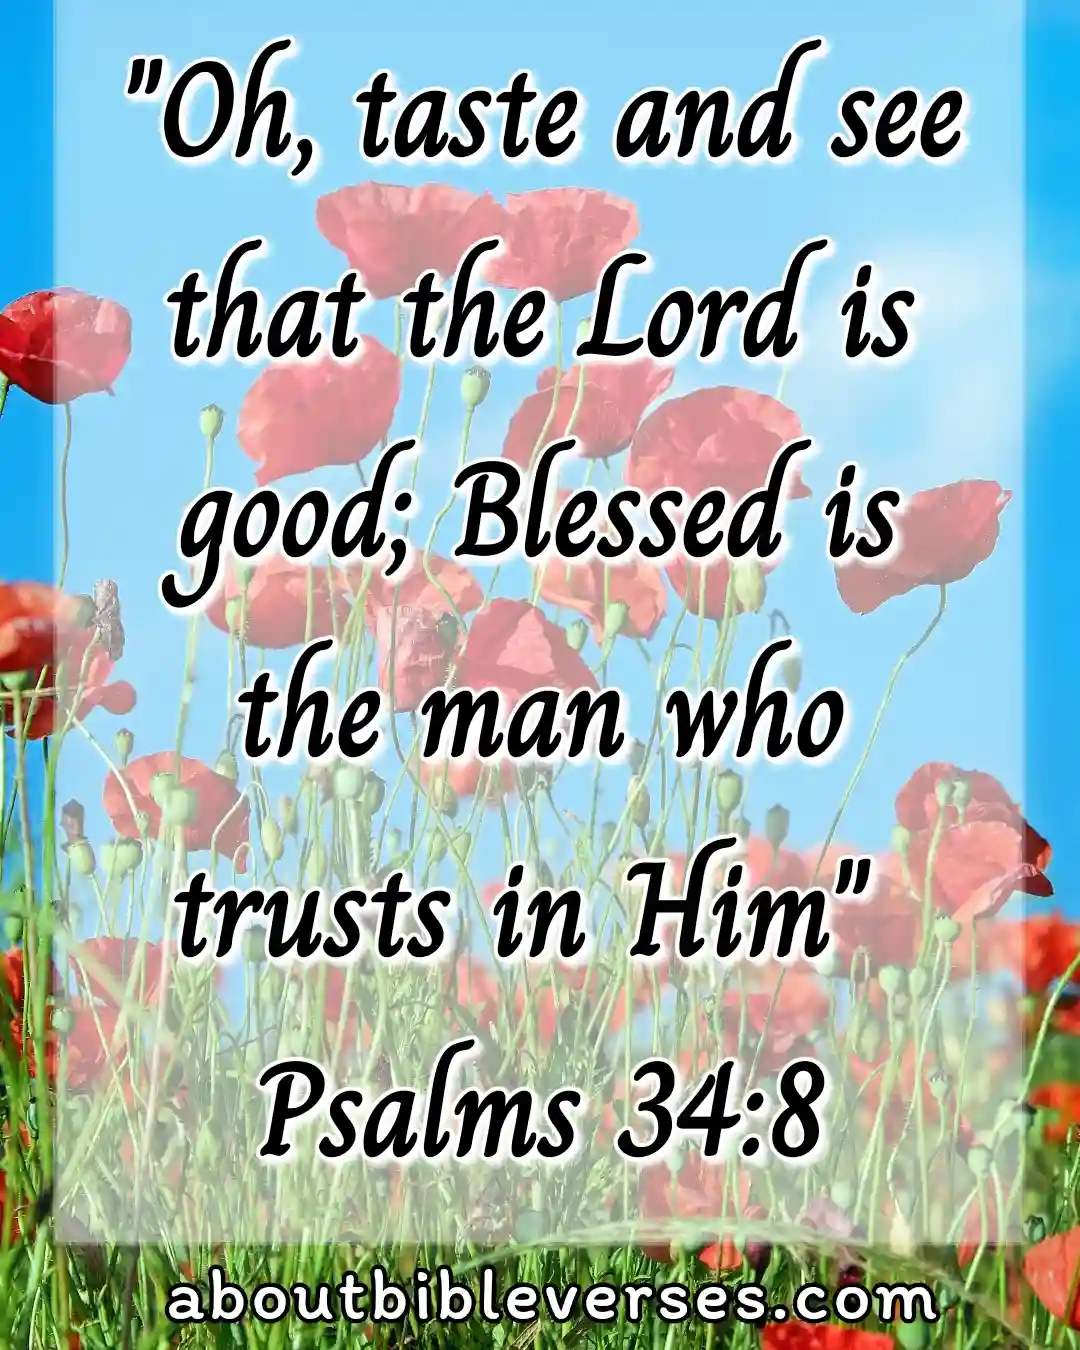 today bible verse (Psalm 34:8)